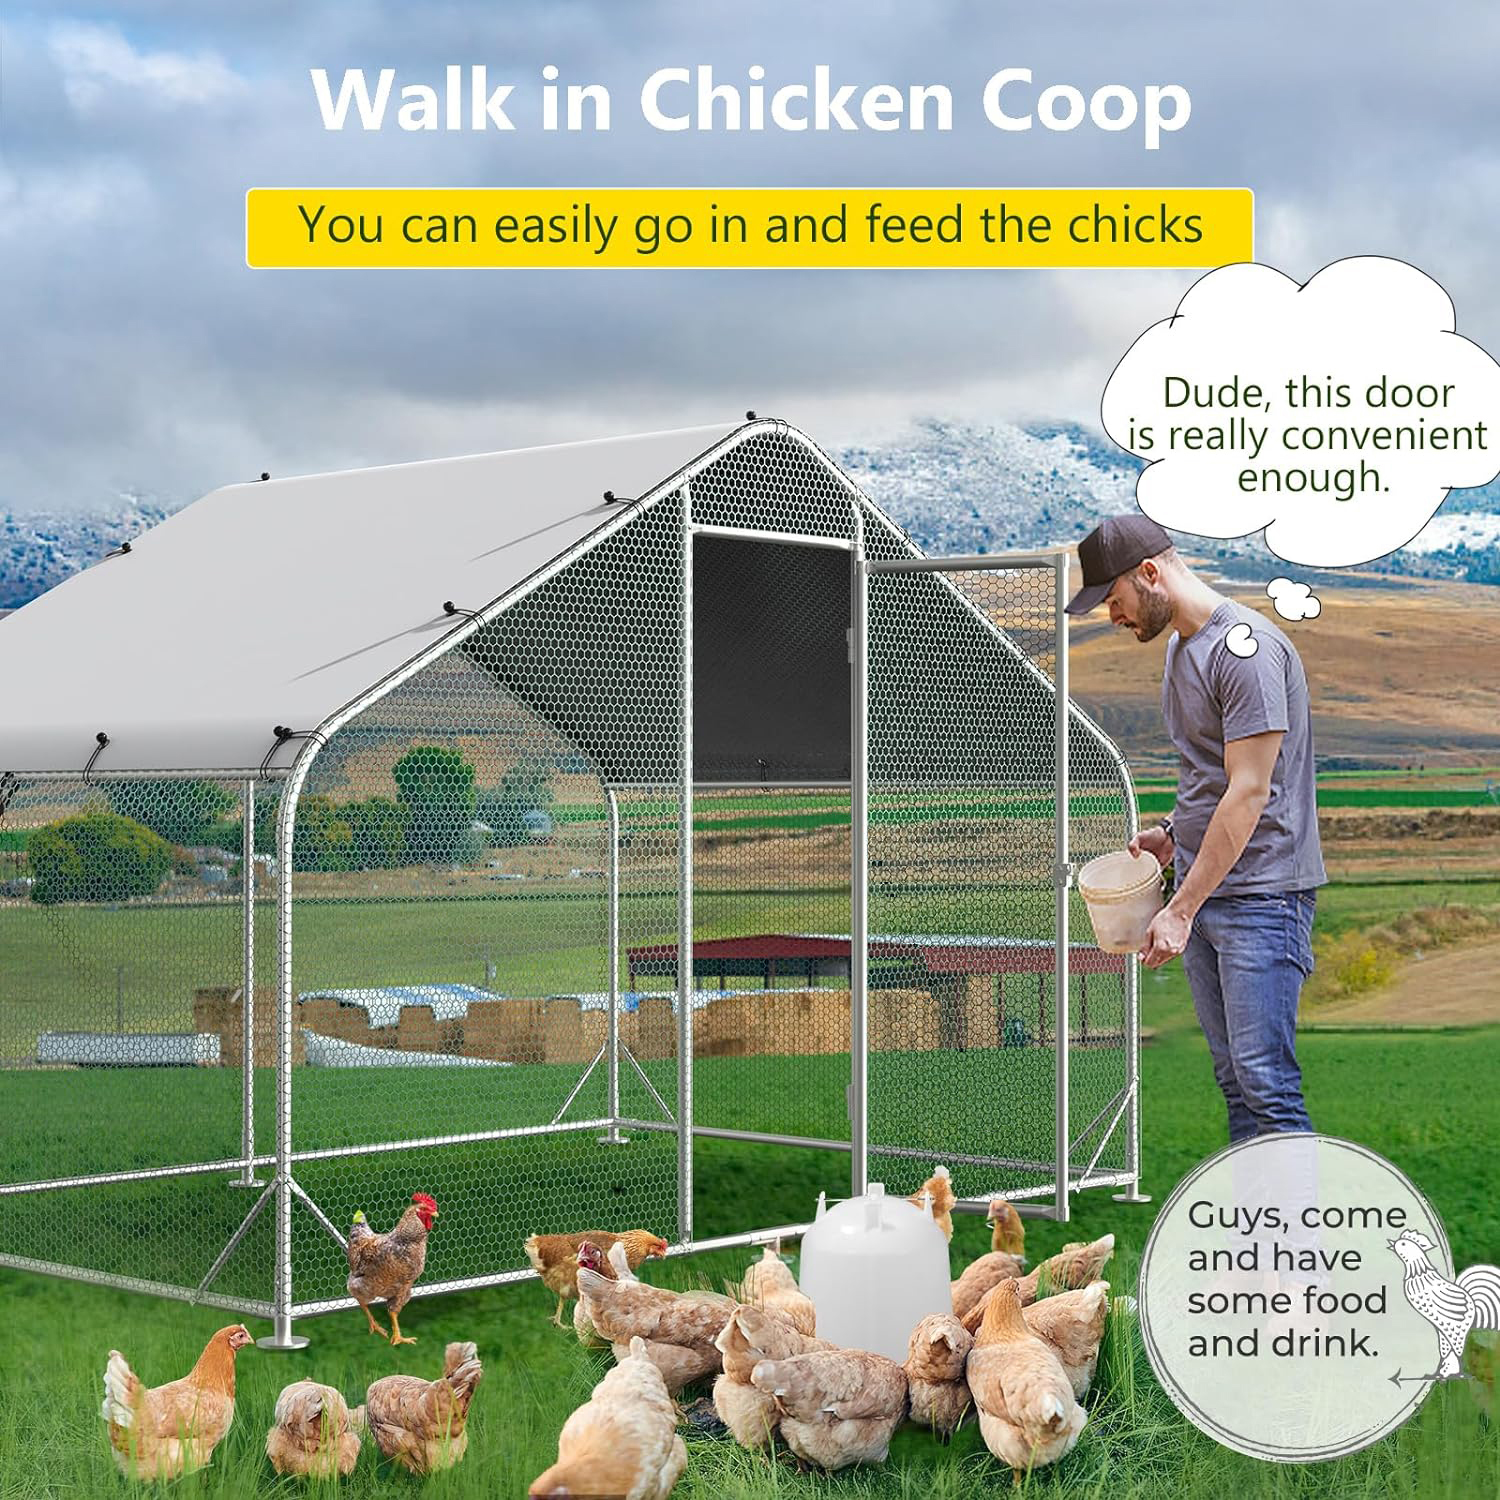 Large Metal Chicken Coops, Outdoor Duck Walk-in Run Poultry Cage, Hen House Yard Habitat Cage with Waterproof Cover Spire Shaped Coop, 9.8' L x 6.6' W x 6.6' H - image 3 of 4